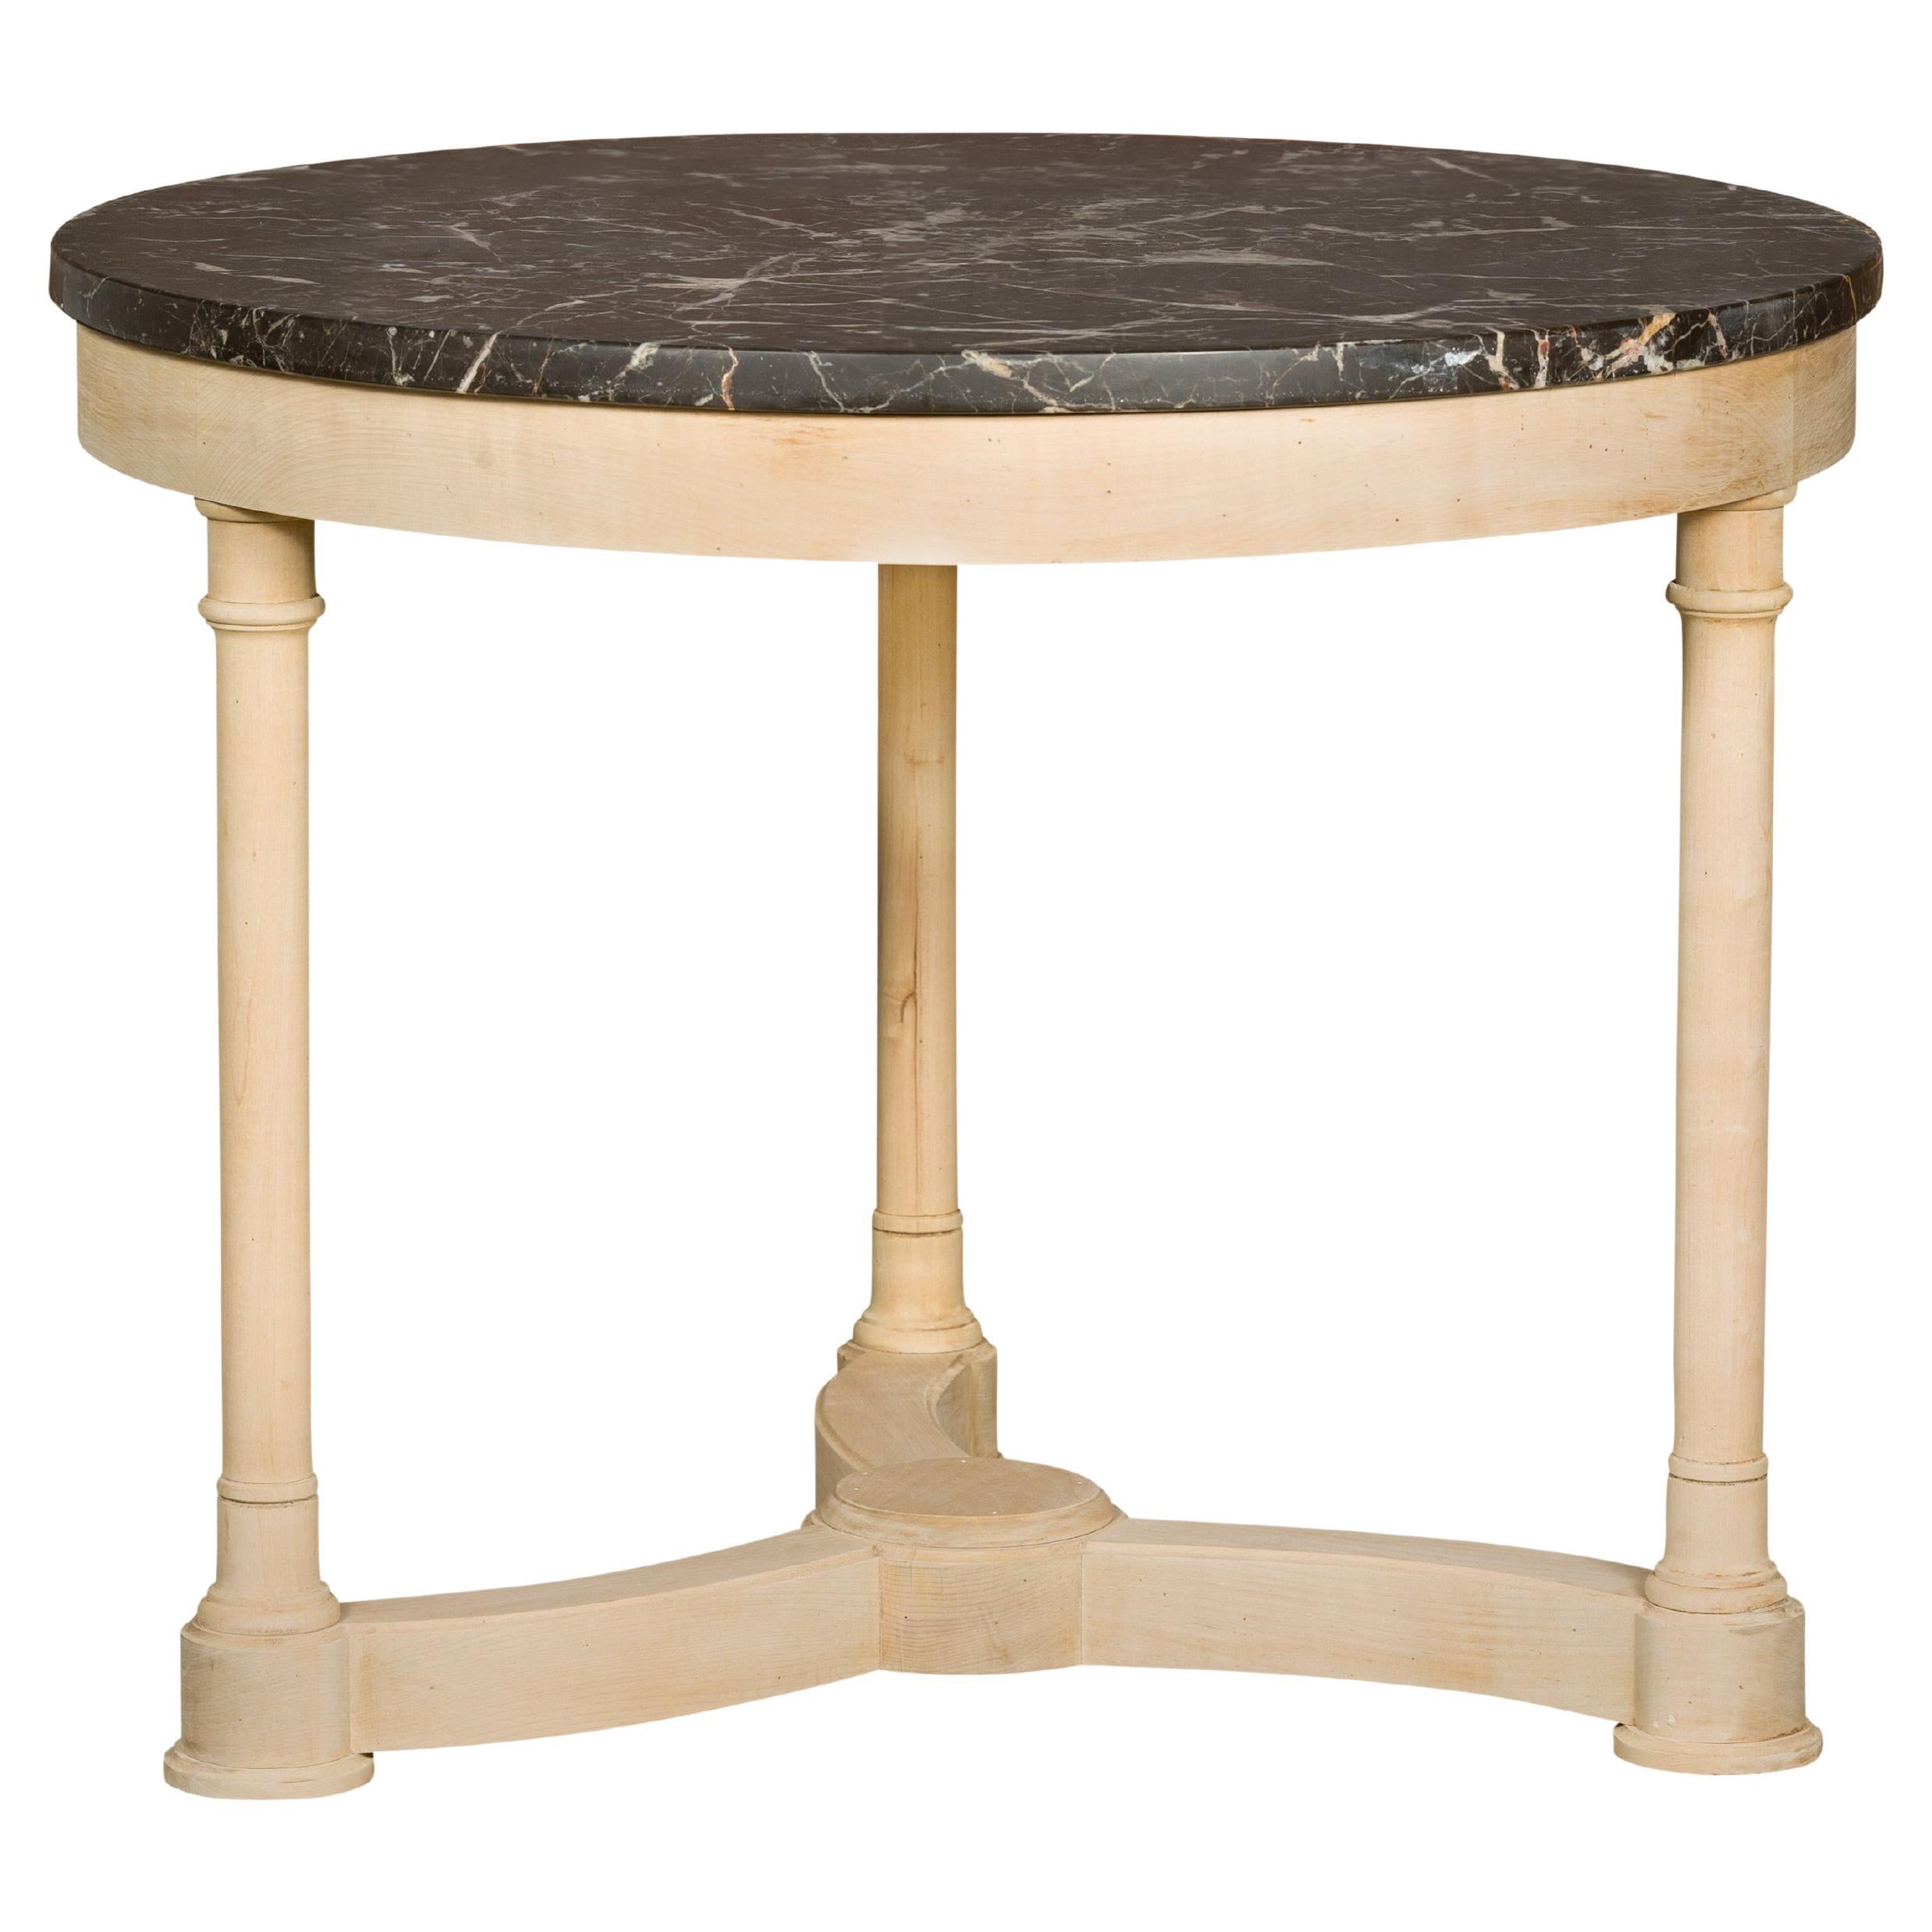 Empire Style 19th Century French Walnut Table with Black Marble Top and Columns